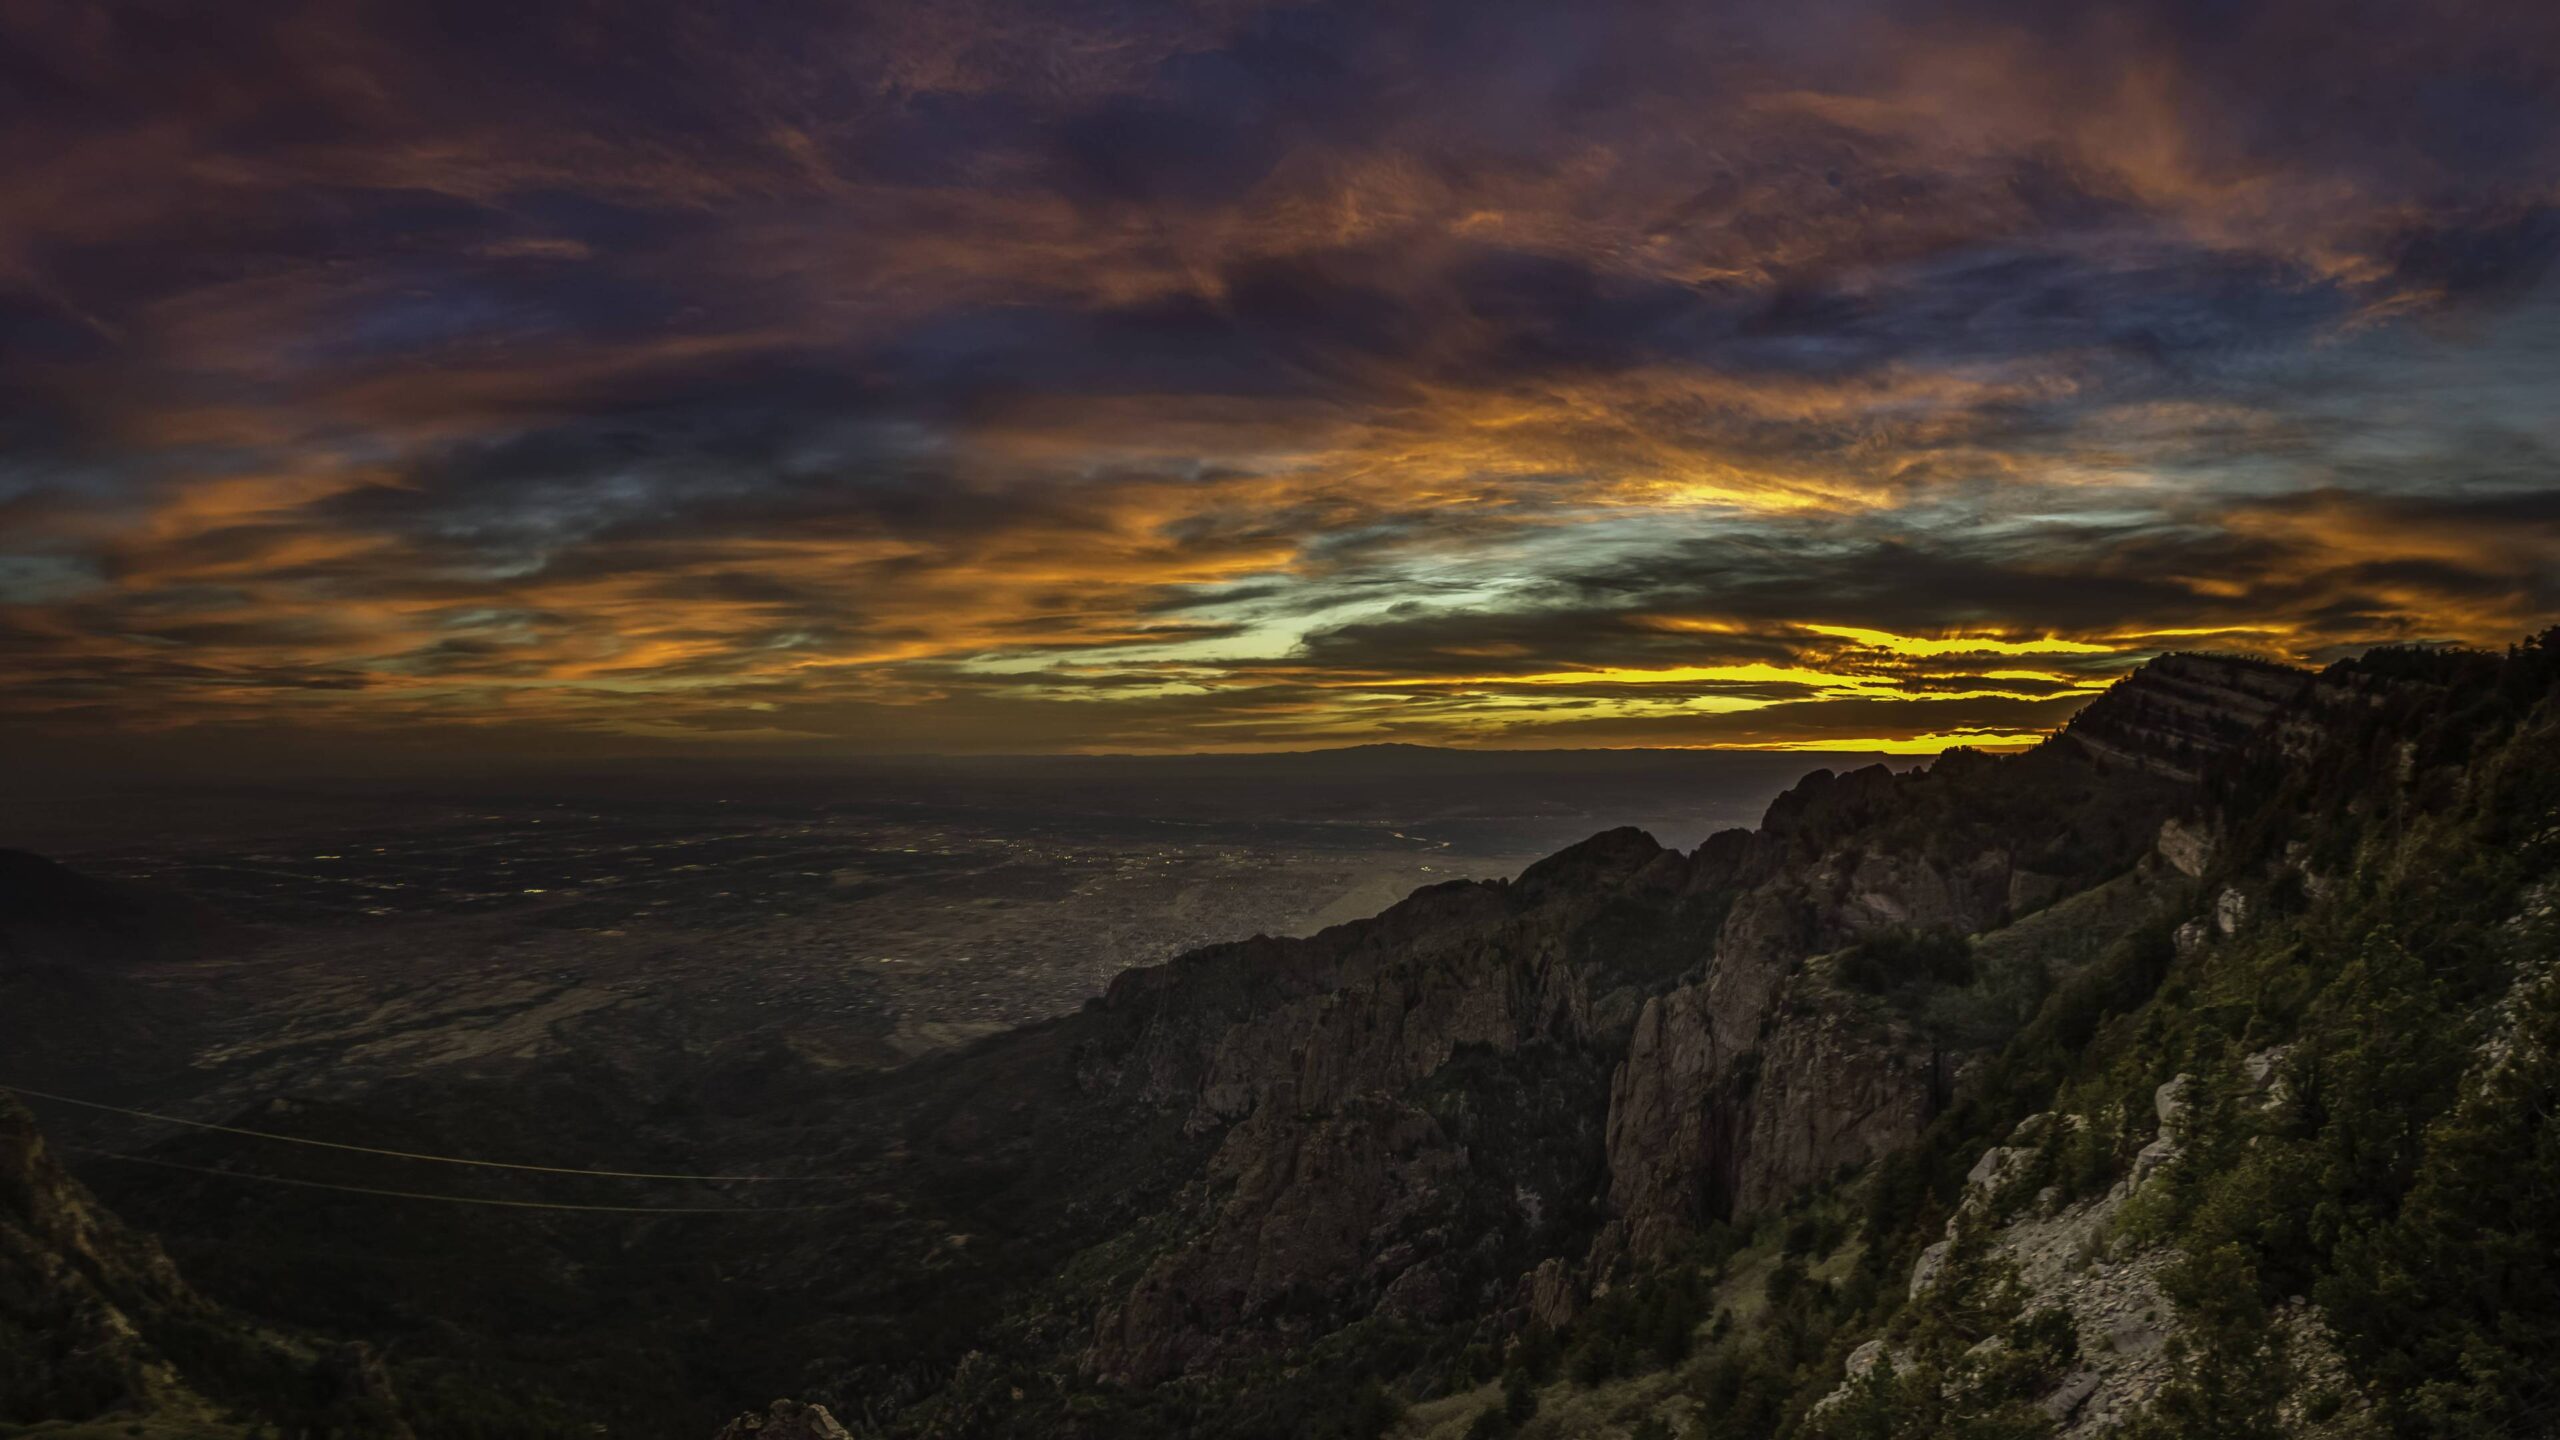 BOTPOST The view of Albuquerque, New Mexico at sunset from Sandia